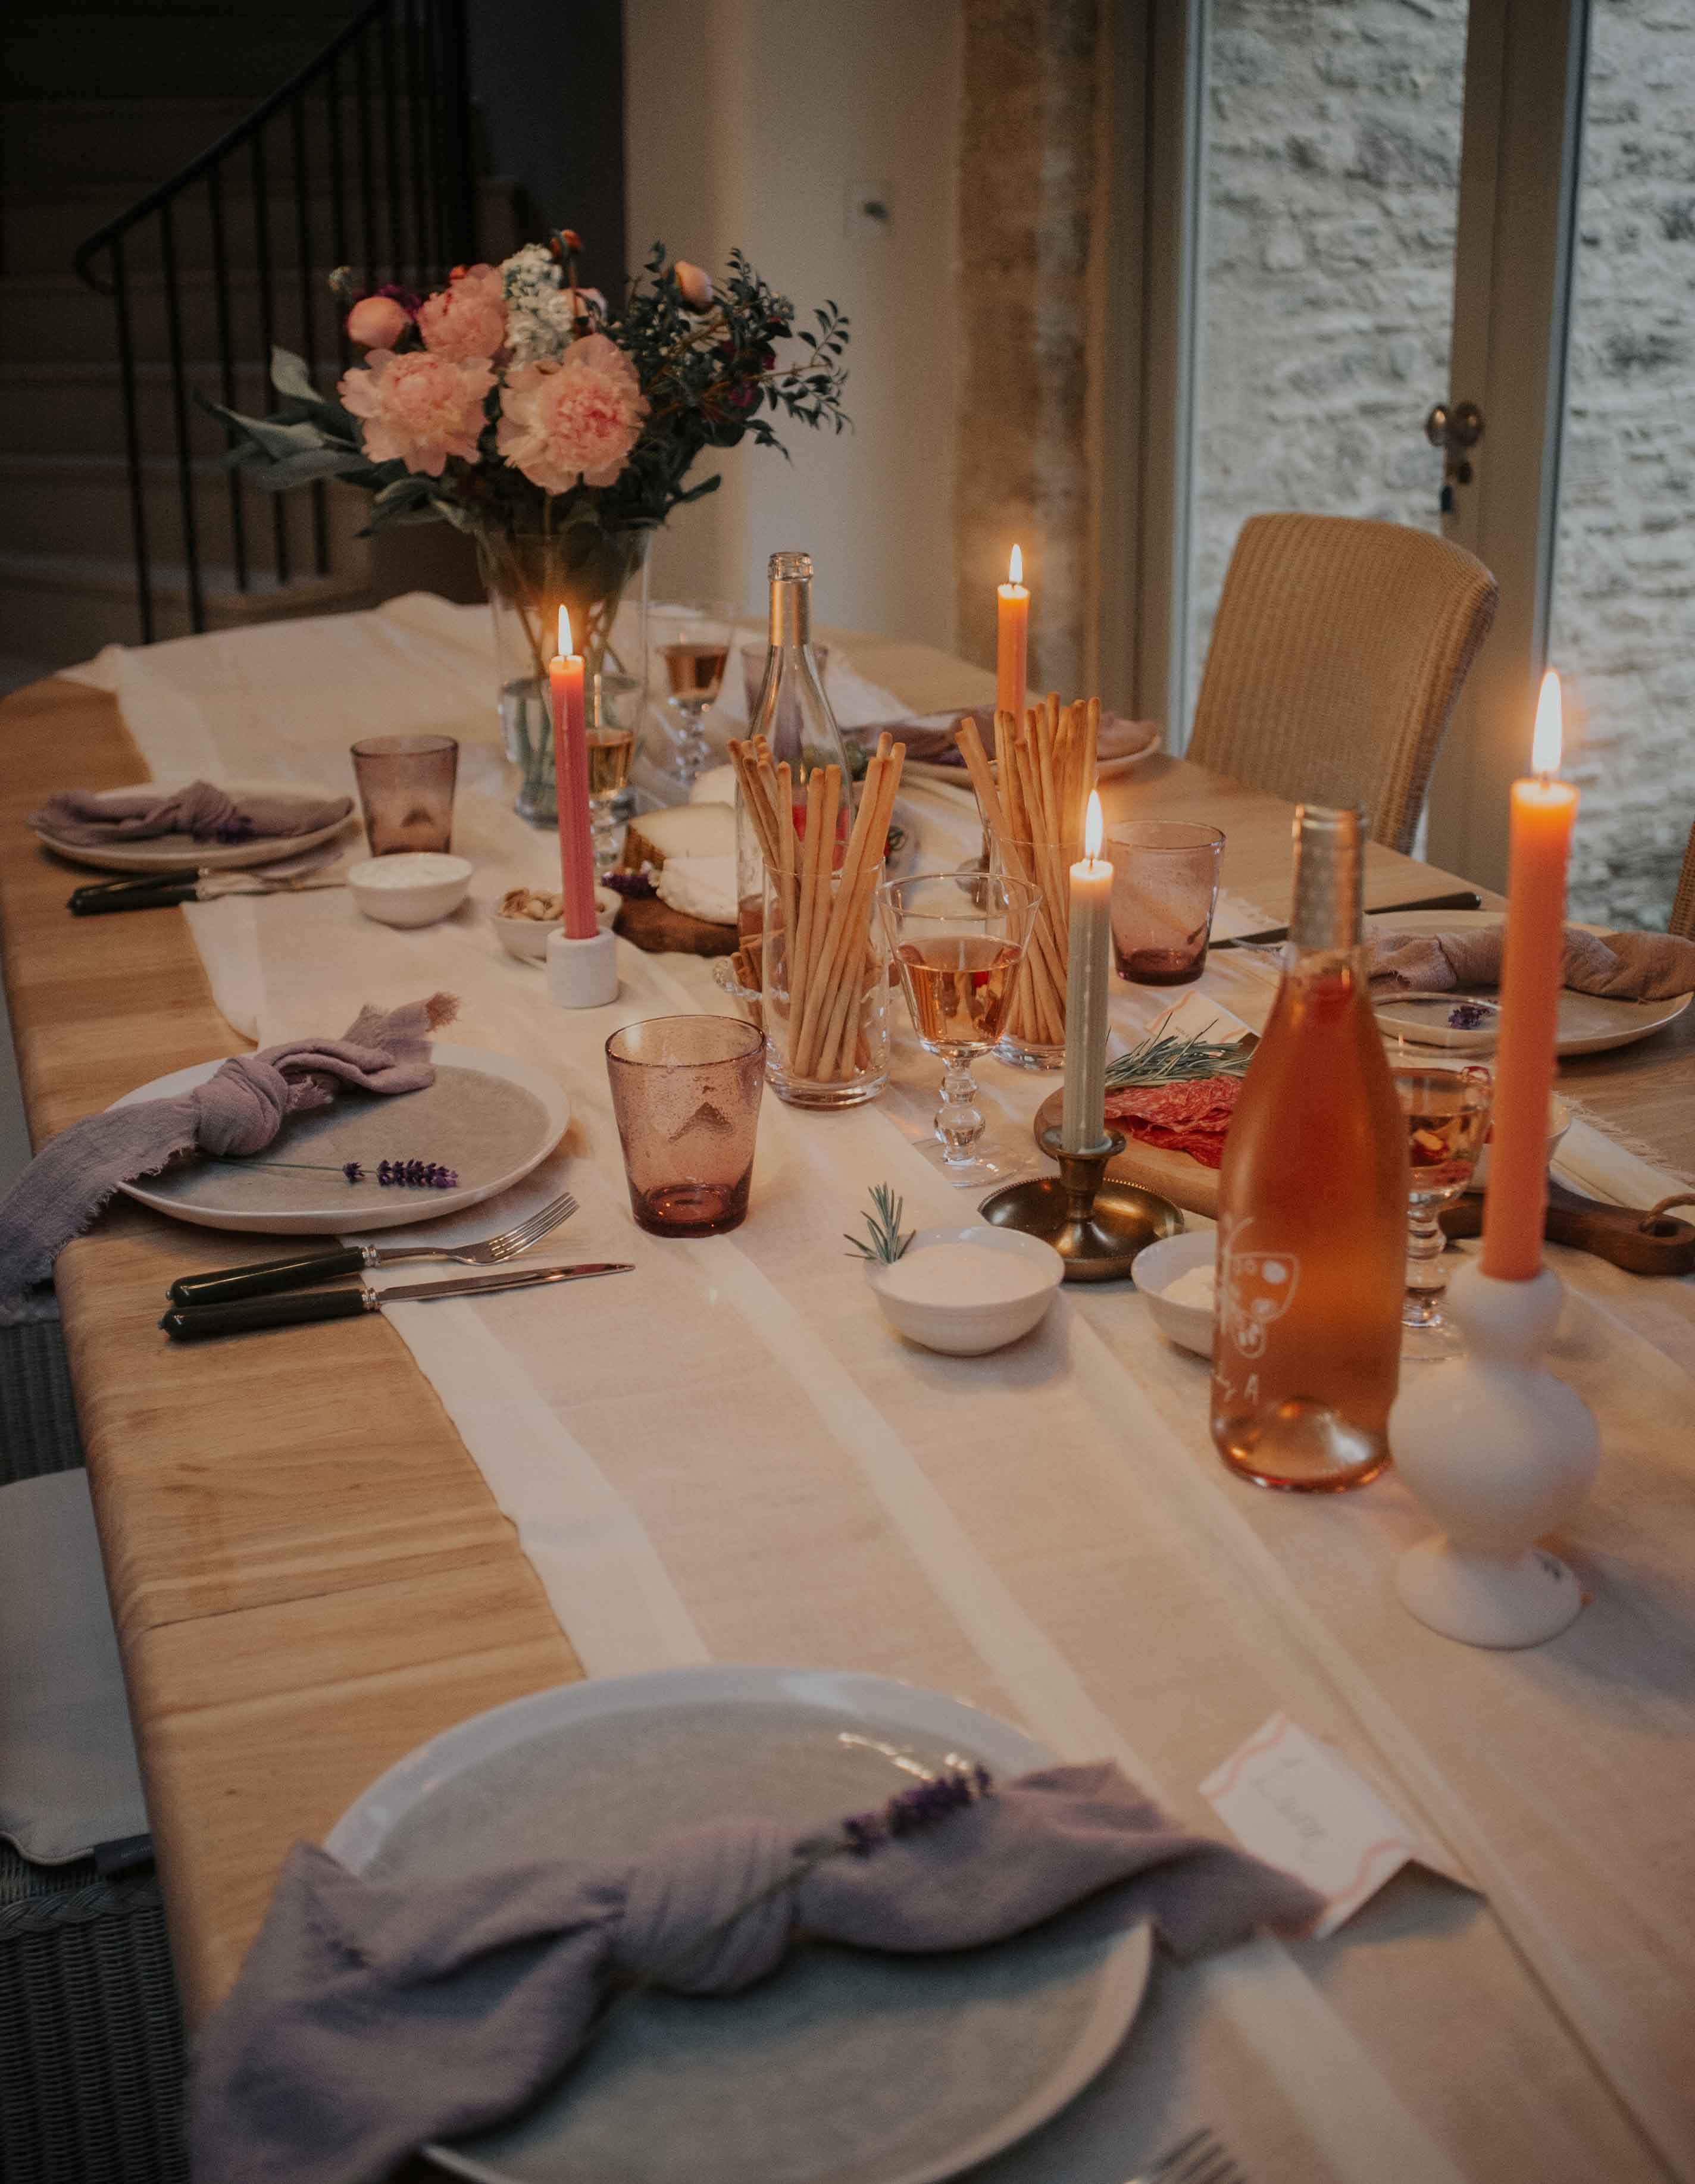 Lavender's dining table dressed for dinner and decorated with flowers and candles